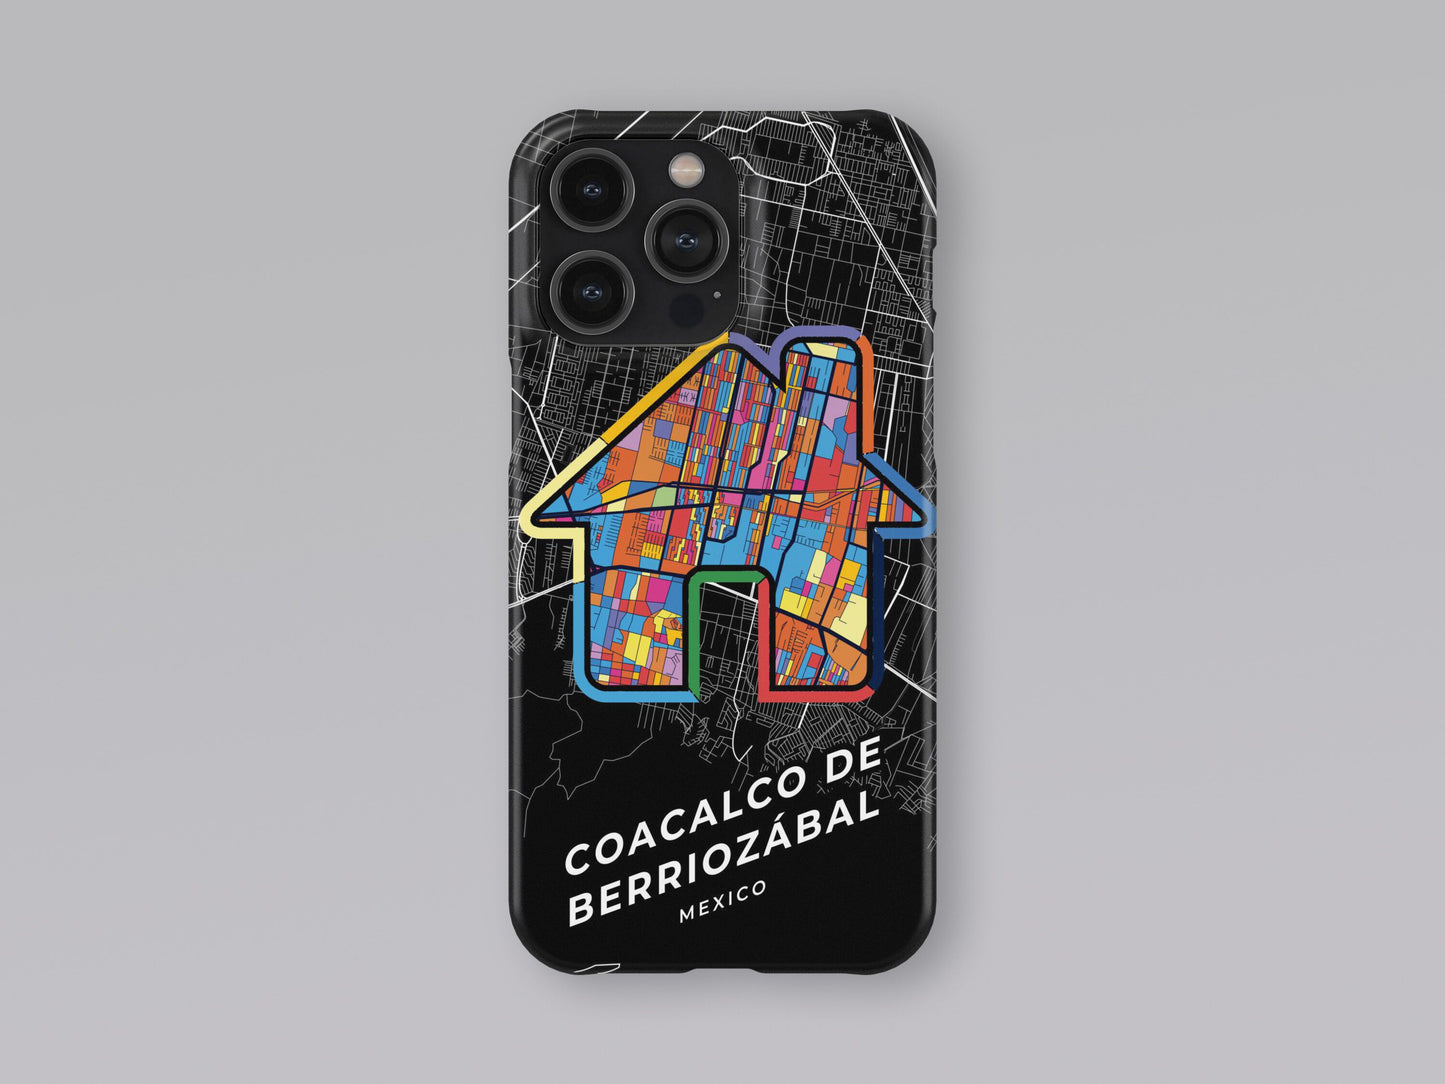 Coacalco De Berriozábal Mexico slim phone case with colorful icon. Birthday, wedding or housewarming gift. Couple match cases. 3